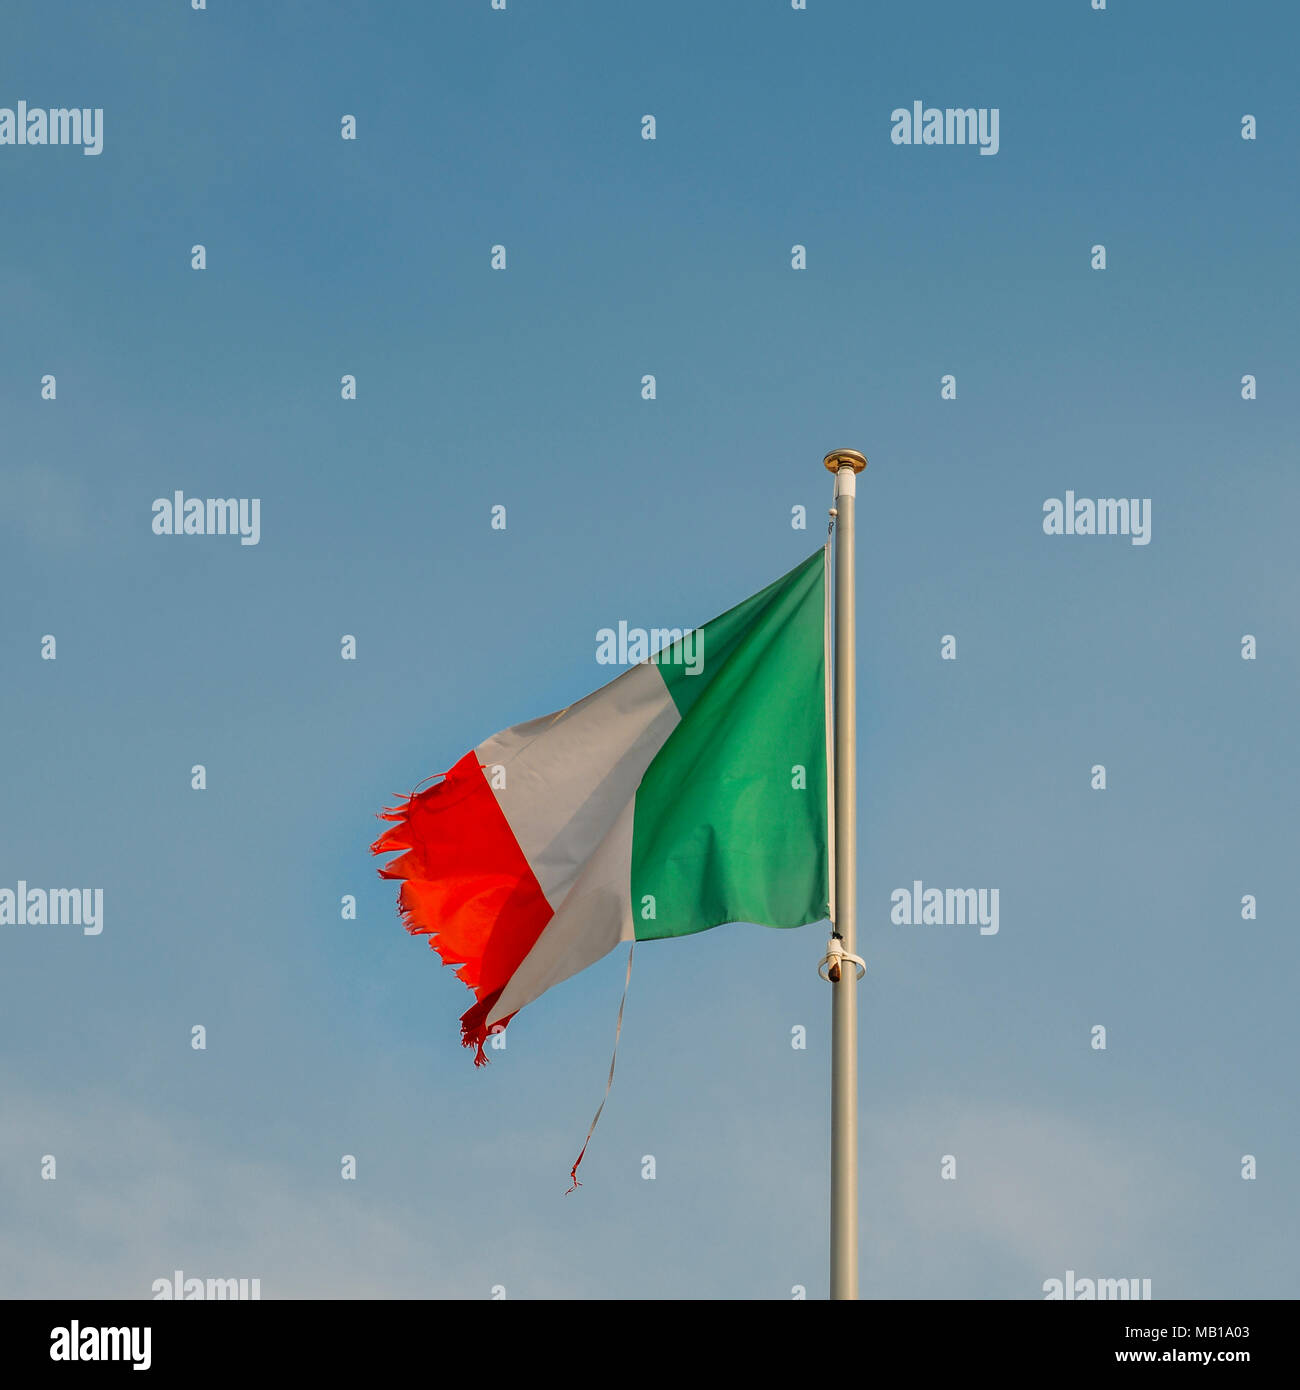 Italian flag on the mast blowing in the wind with ripped corners, perhaps a metaphor for a series of political and economic crisis facing the country. Stock Photo